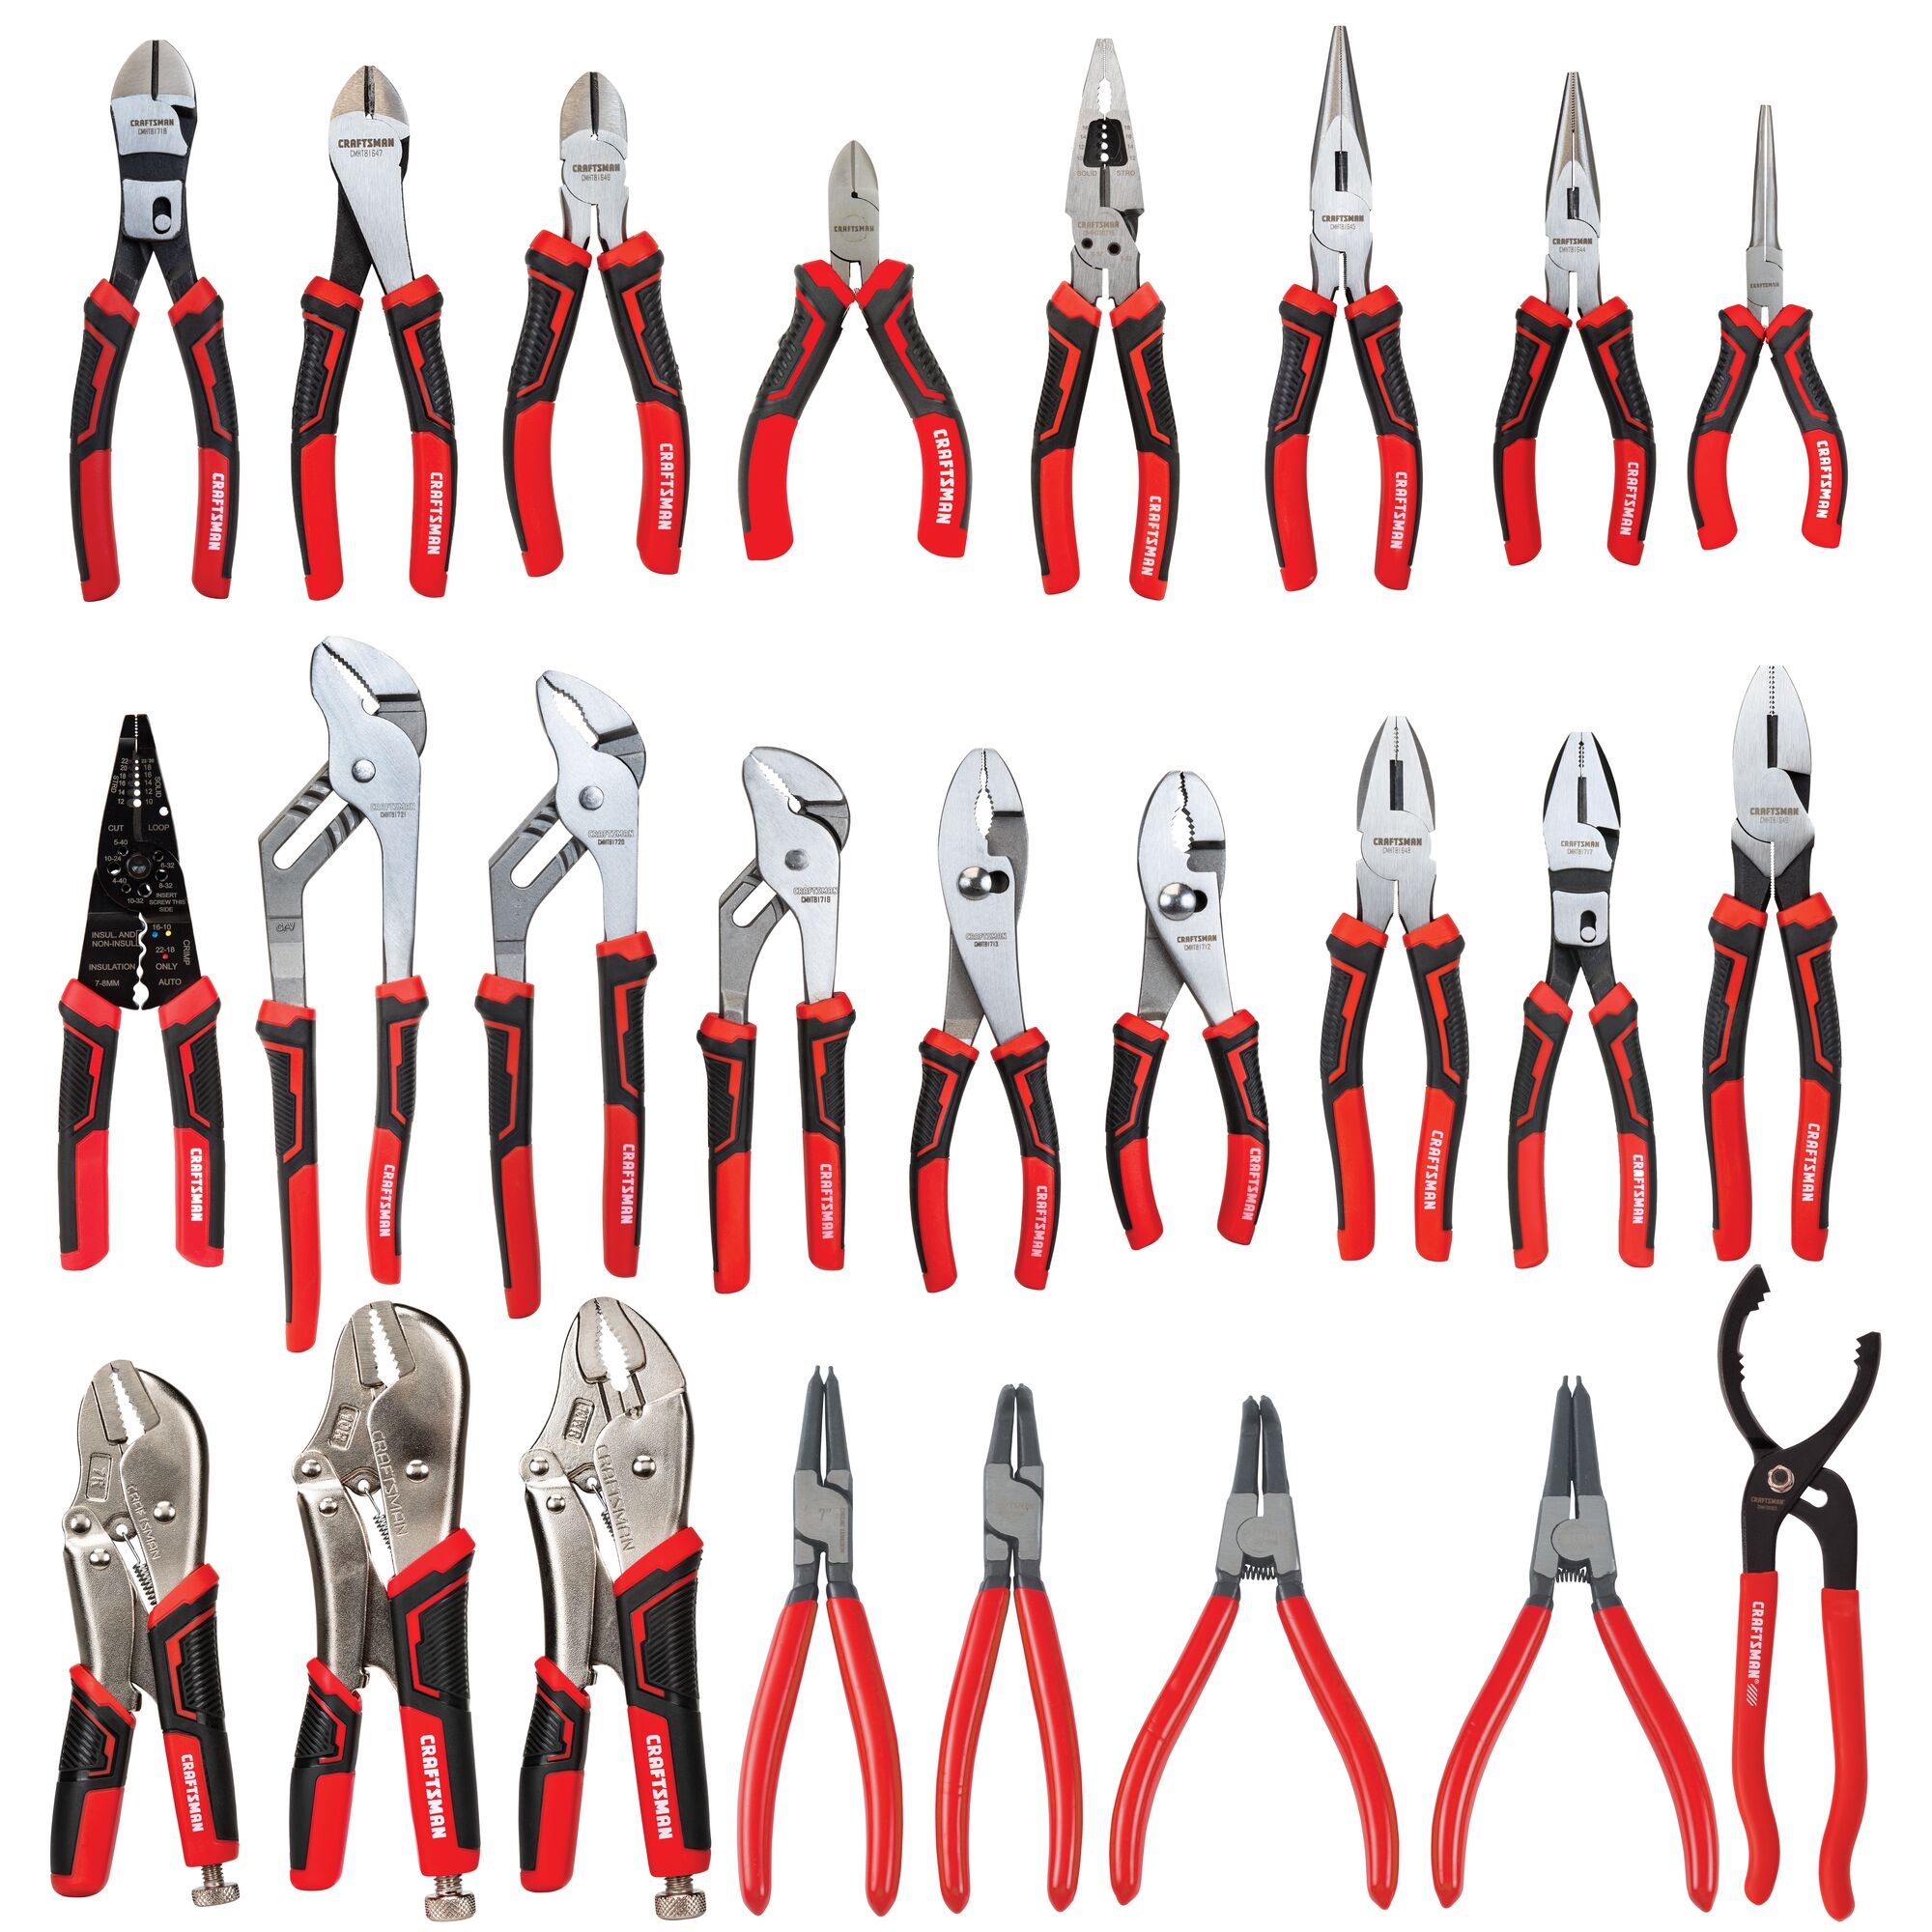 View of CRAFTSMAN Pliers: Set and additional tools in the kit